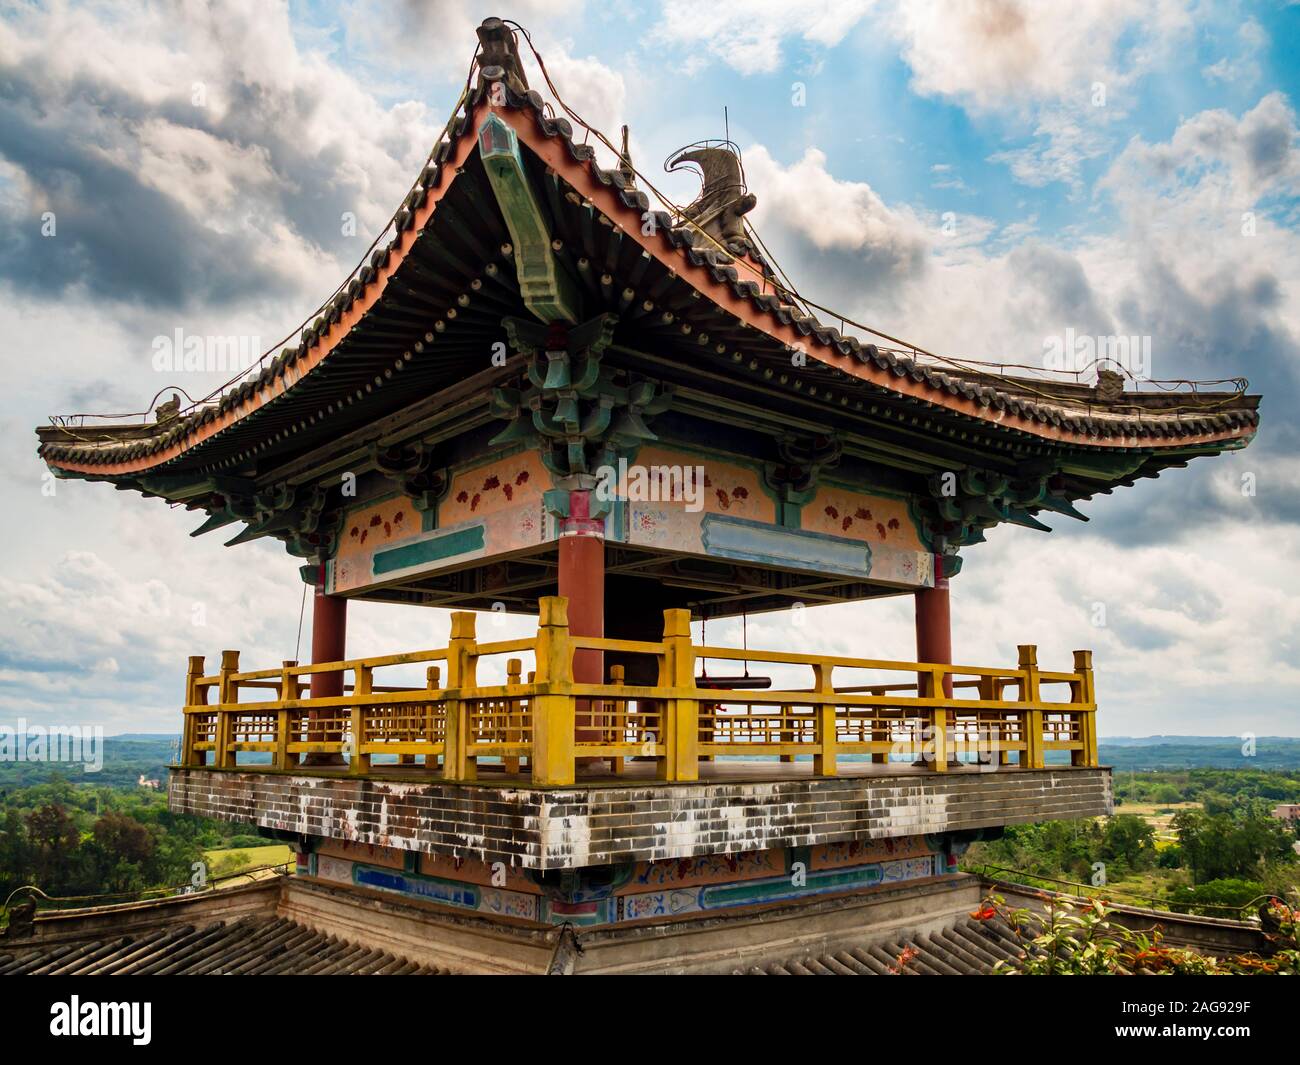 A traditional Chinese roofed pavilion / pagoda on a high mountain in Hainan, China, built in the ancient classical Chinese architecture style Stock Photo